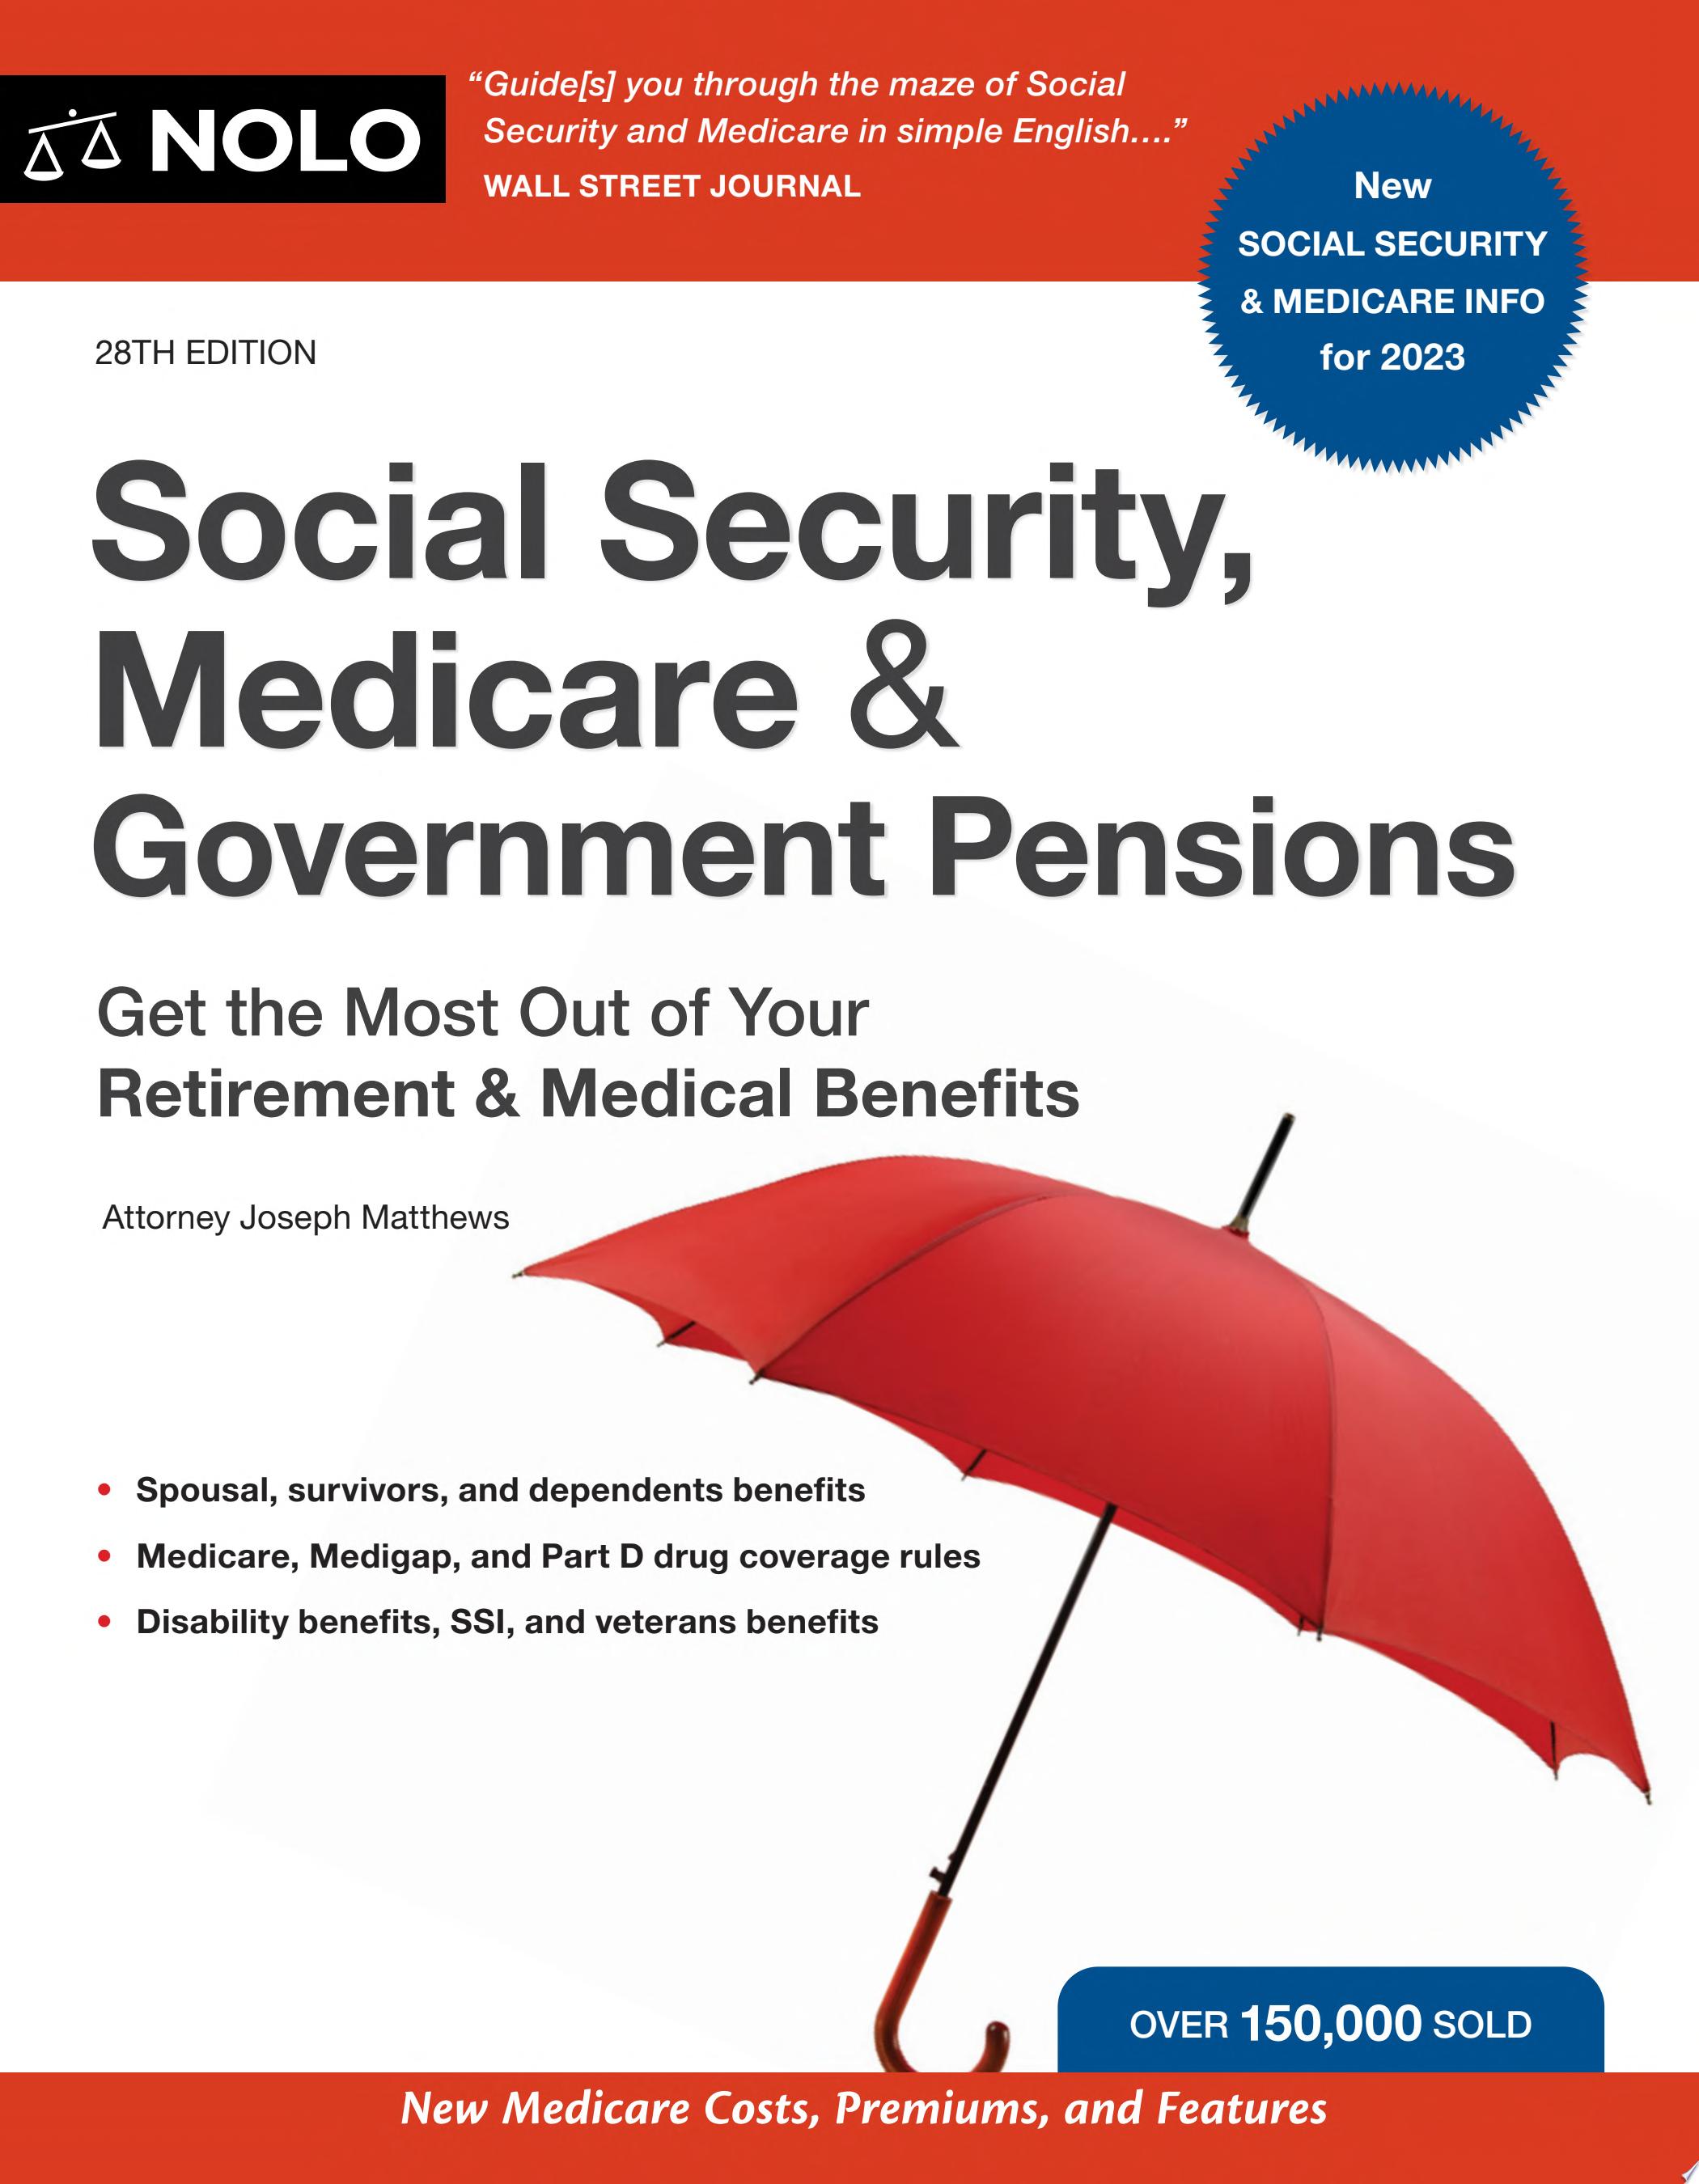 Image for "Social Security, Medicare &amp; Government Pensions"